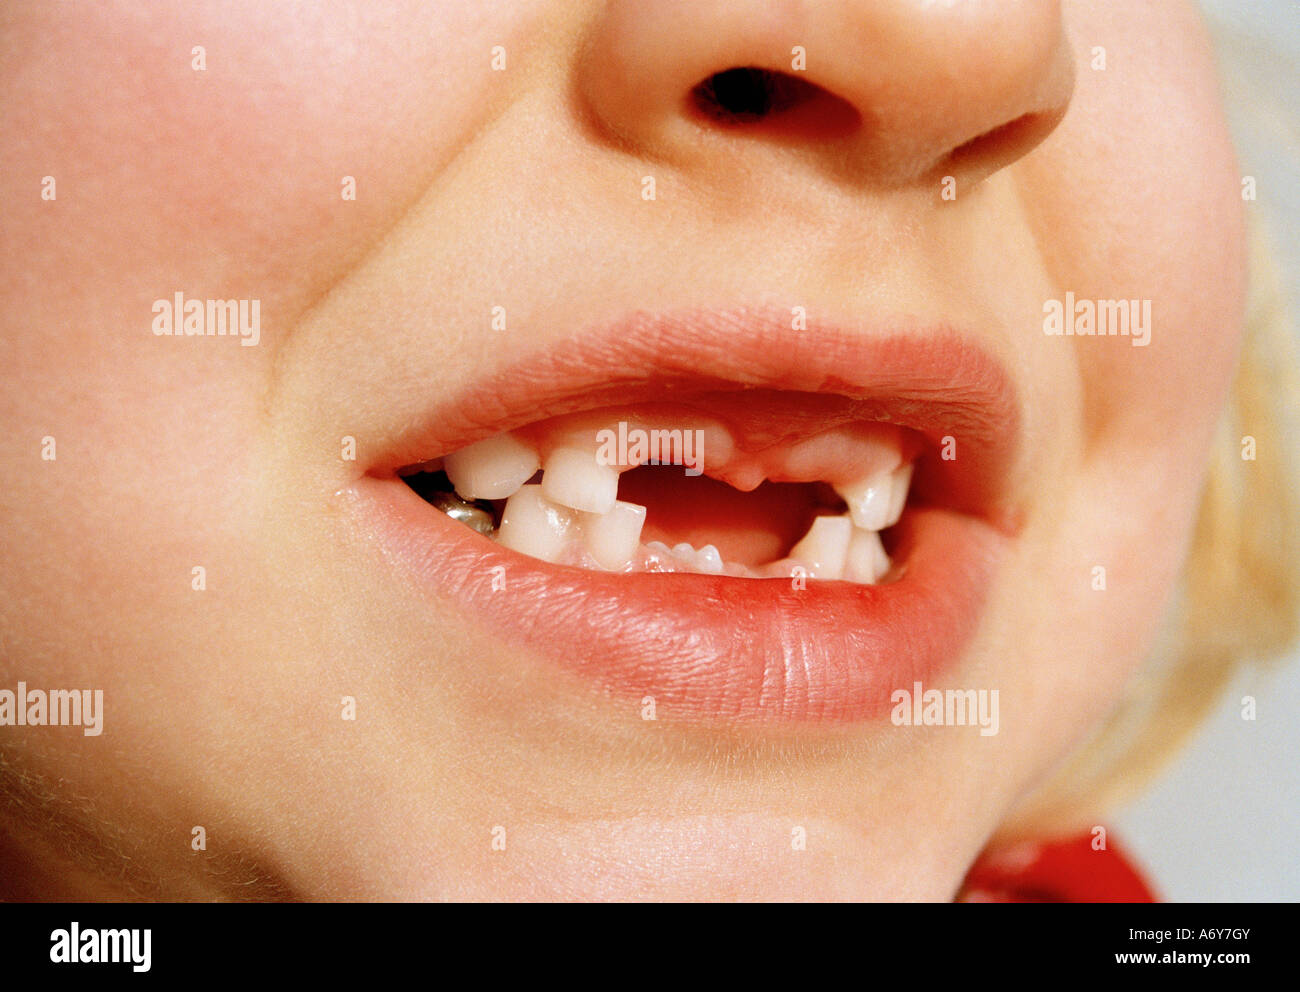 Close up of a young girl with missing teeth Stock Photo